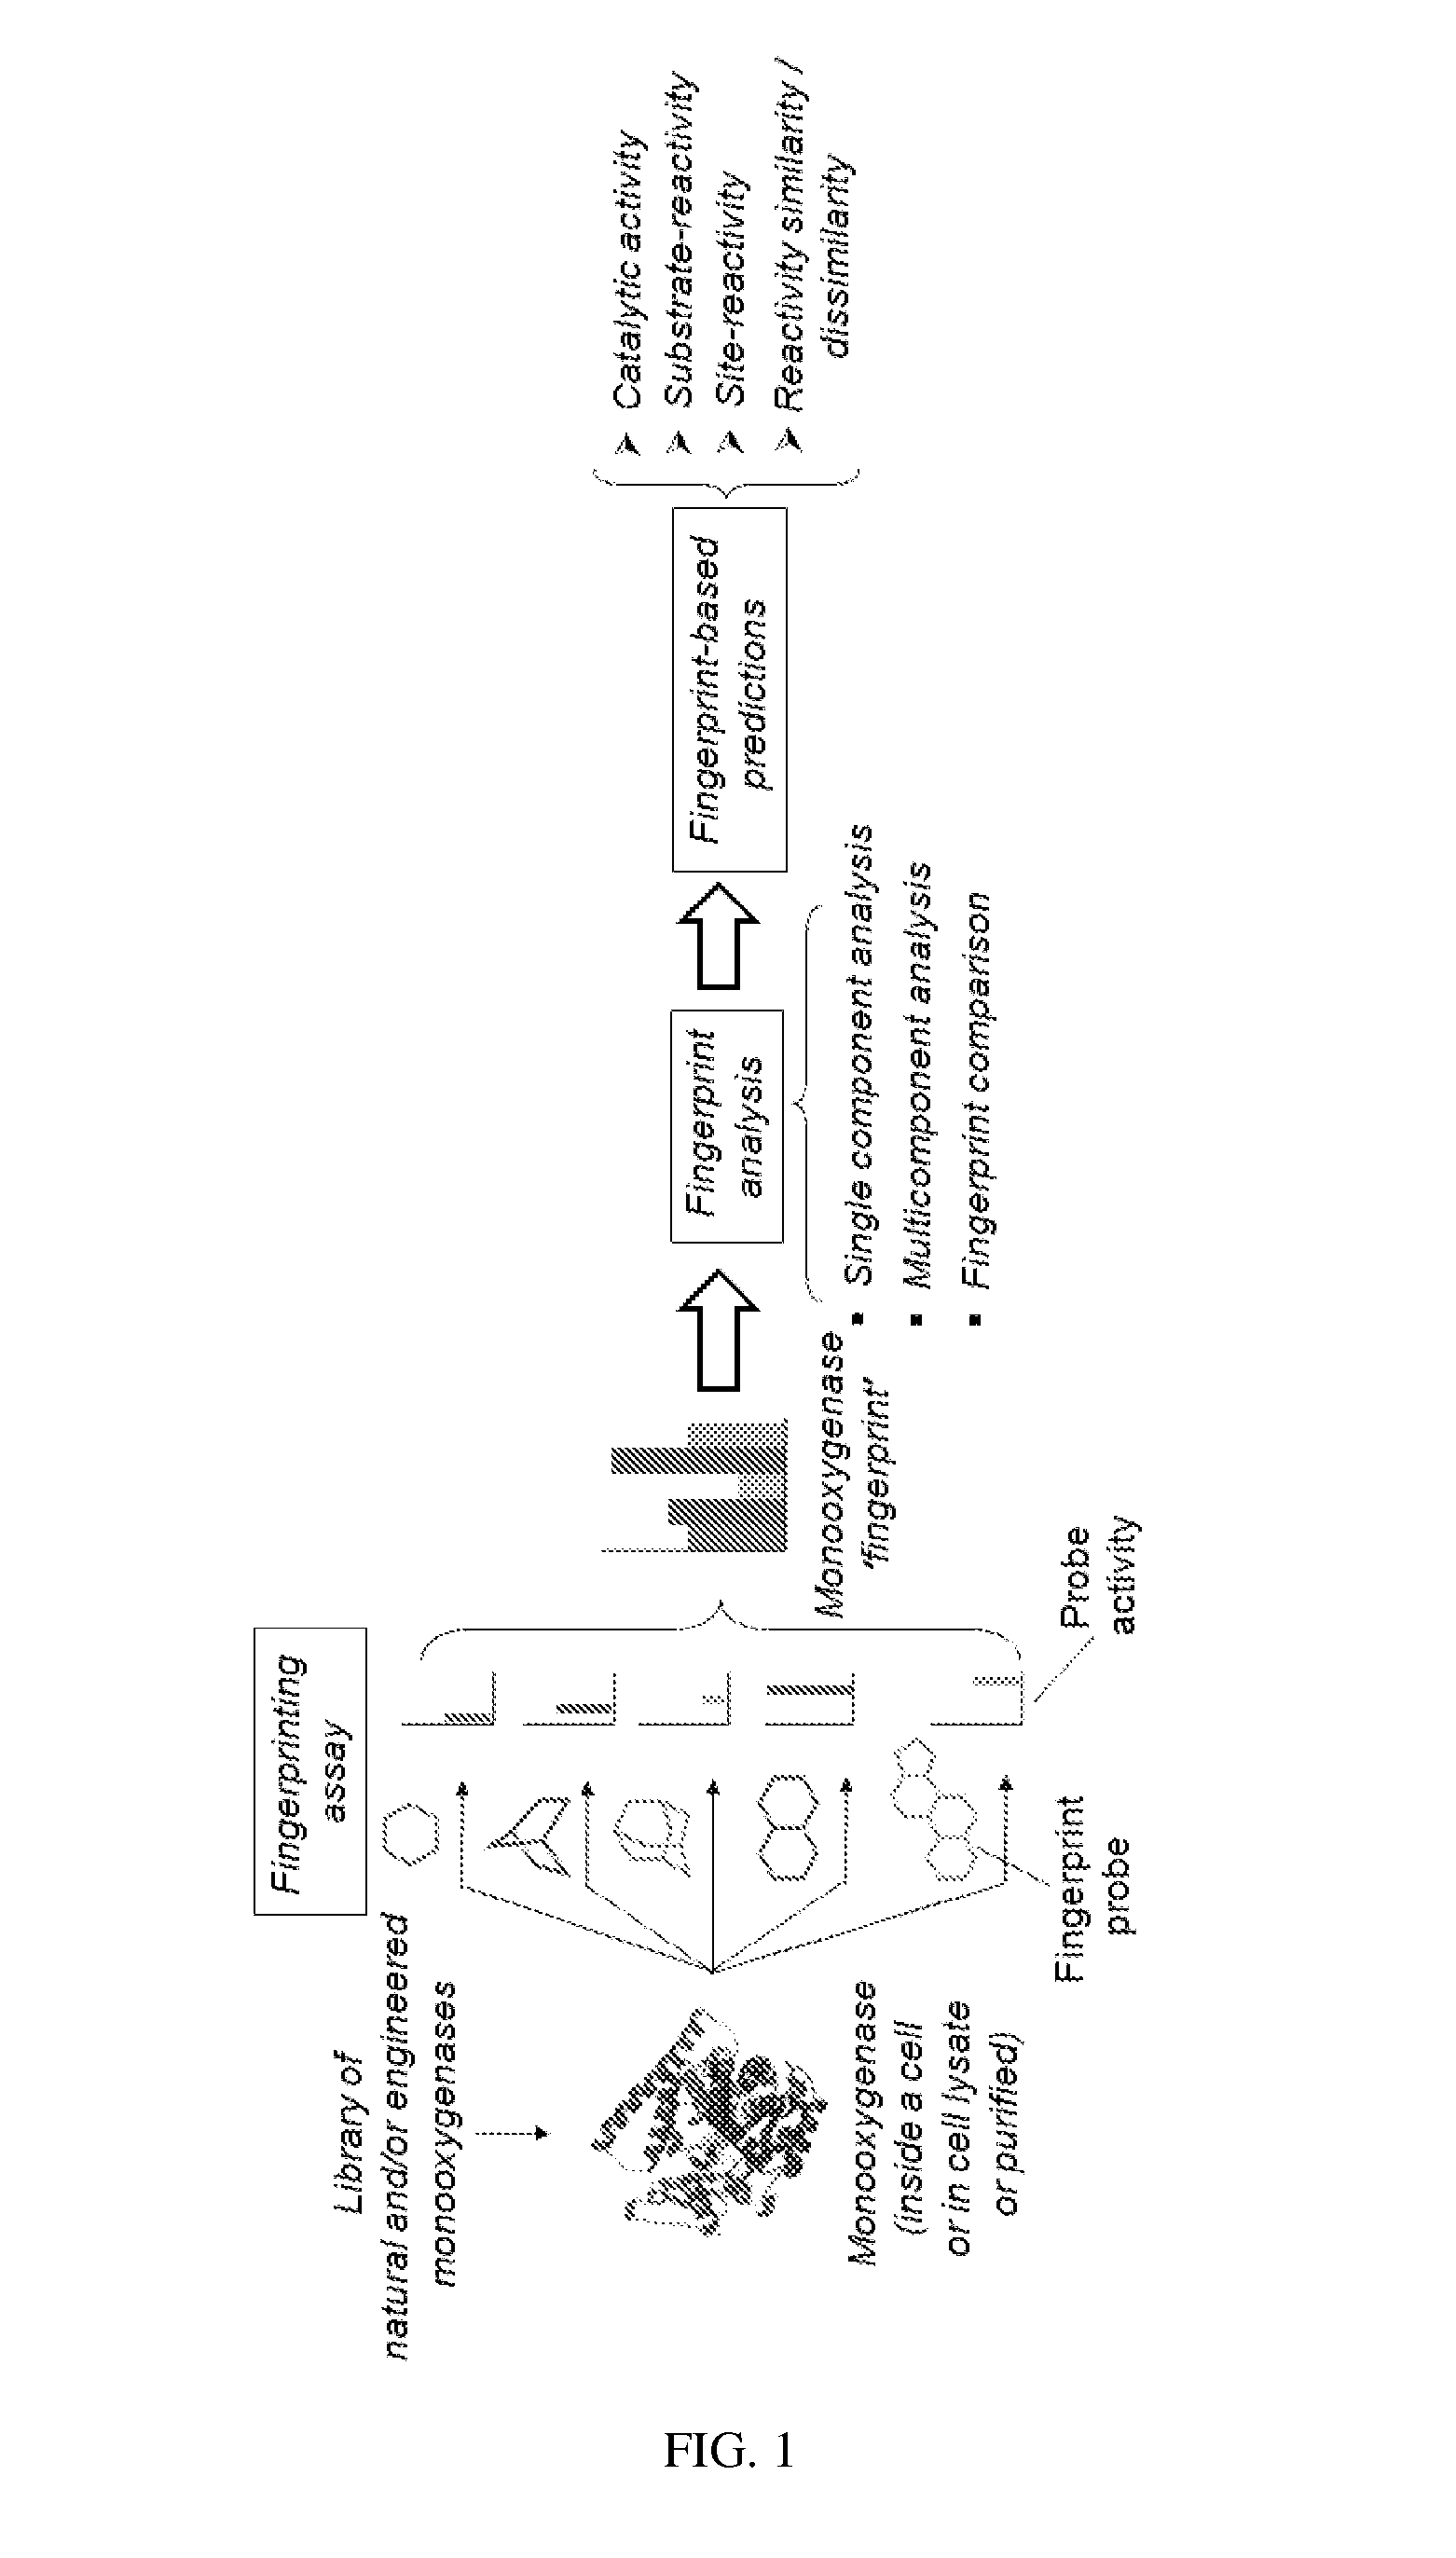 Methods and systems for evaluating and predicting the reactivity of monooxygenase enzymes